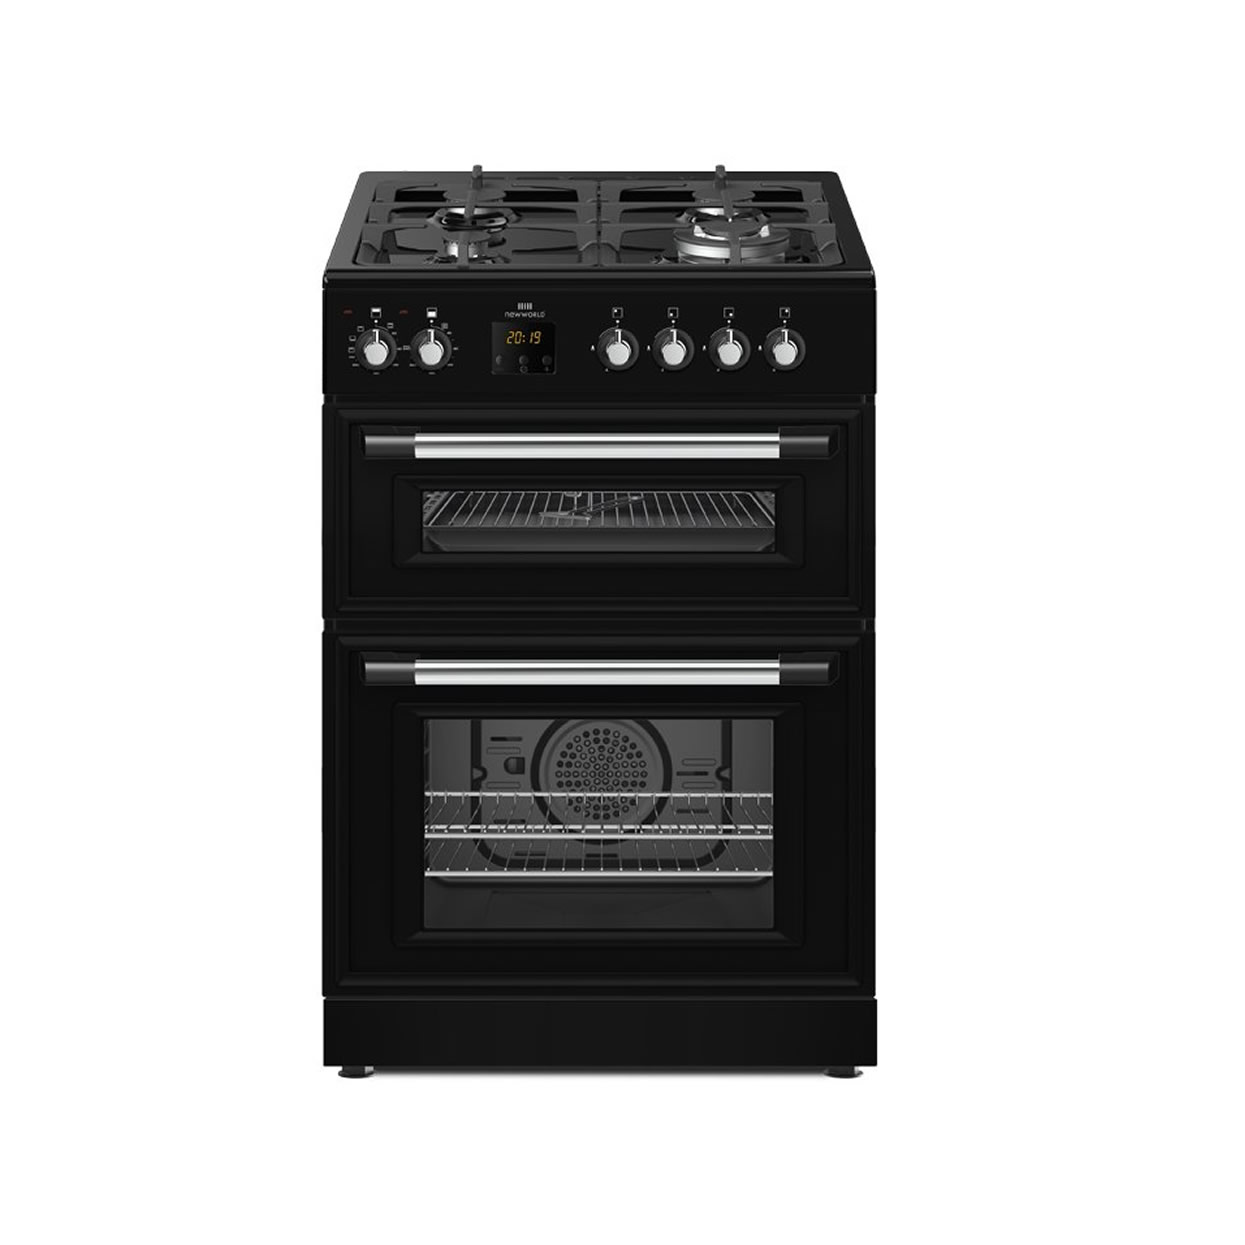 New-World 600mm Double Oven Dual Fuel Cooker Gas Hob Black